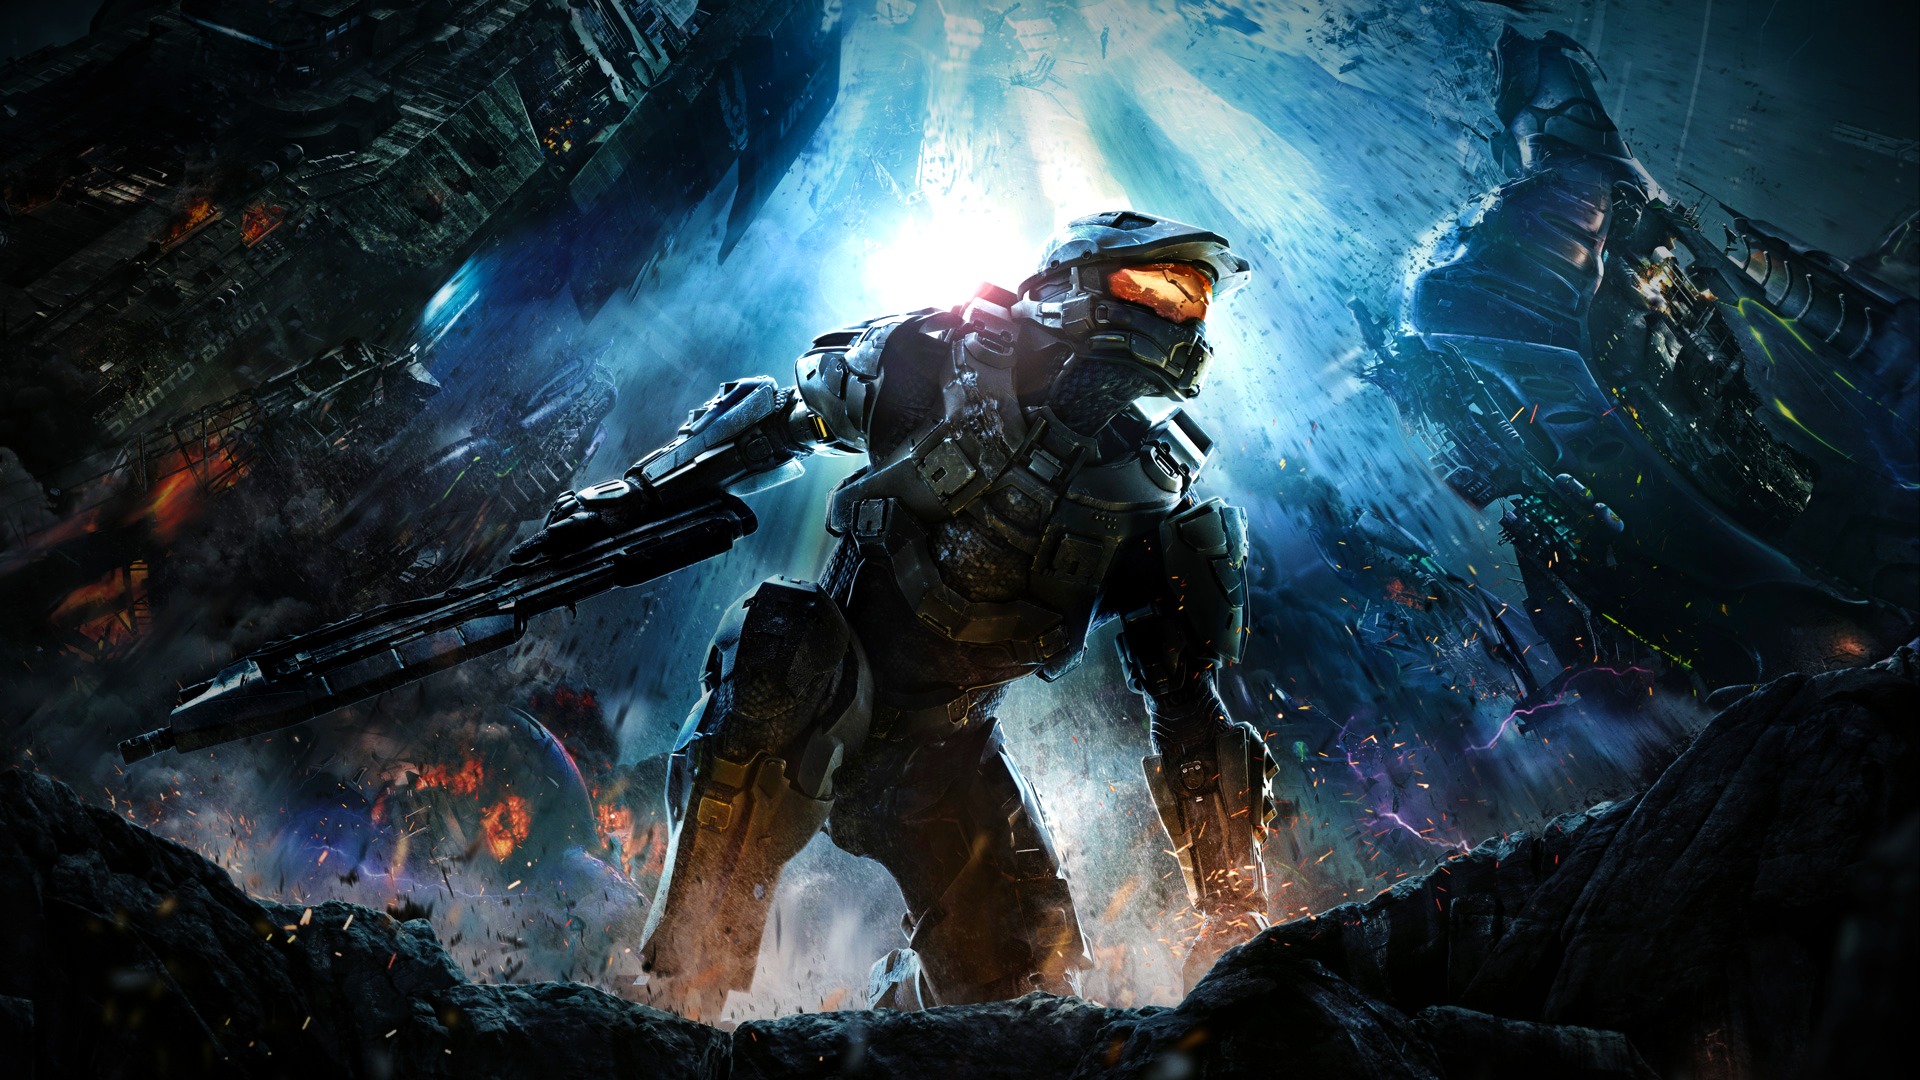 Halo The Master Chief Collection at the best price